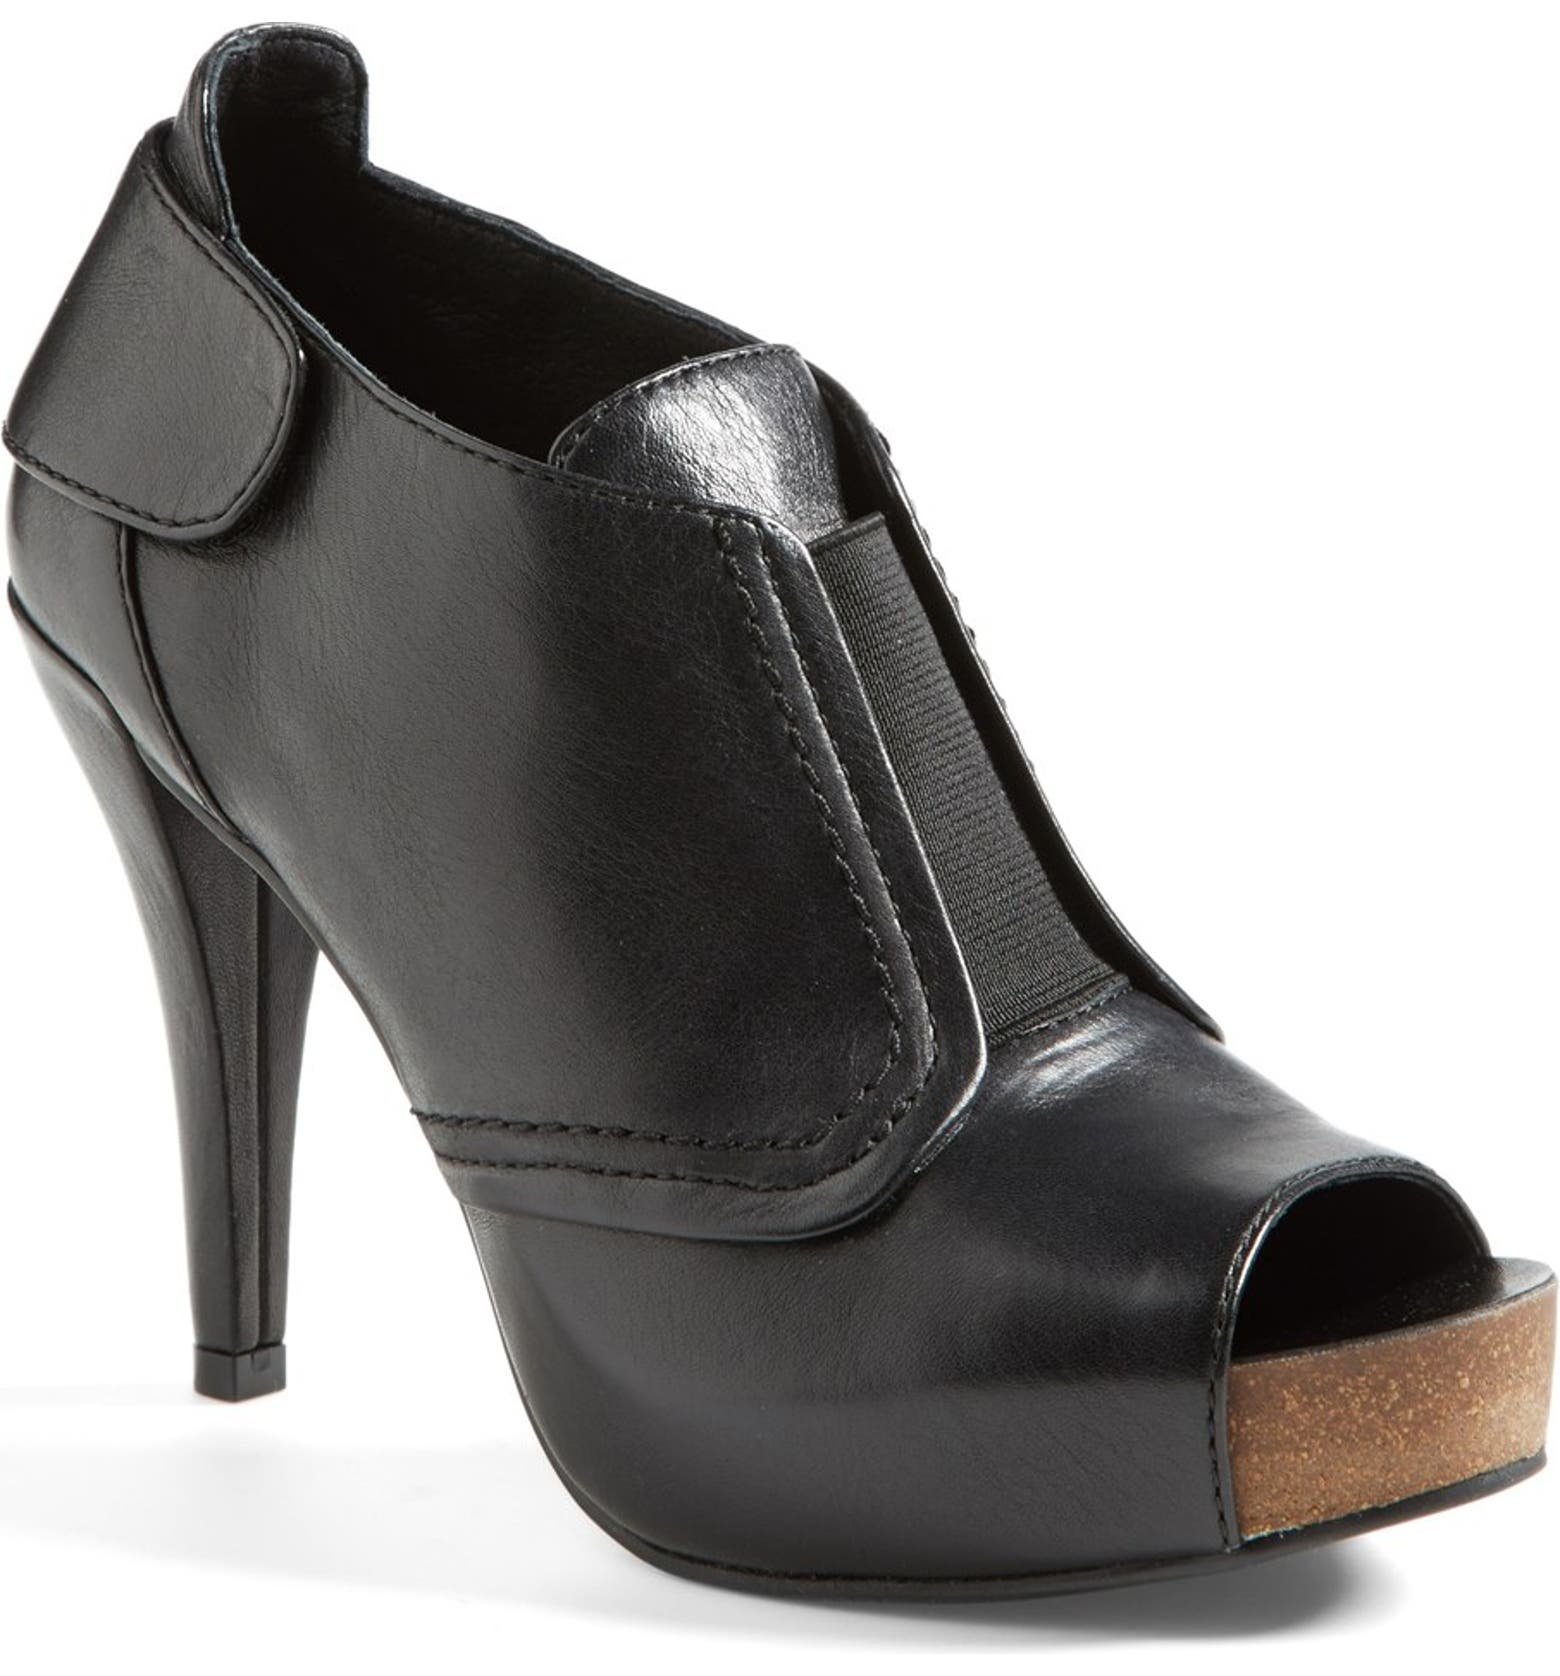 Vince Camuto 'Pernot' Peep Toe Bootie | Nordstrom